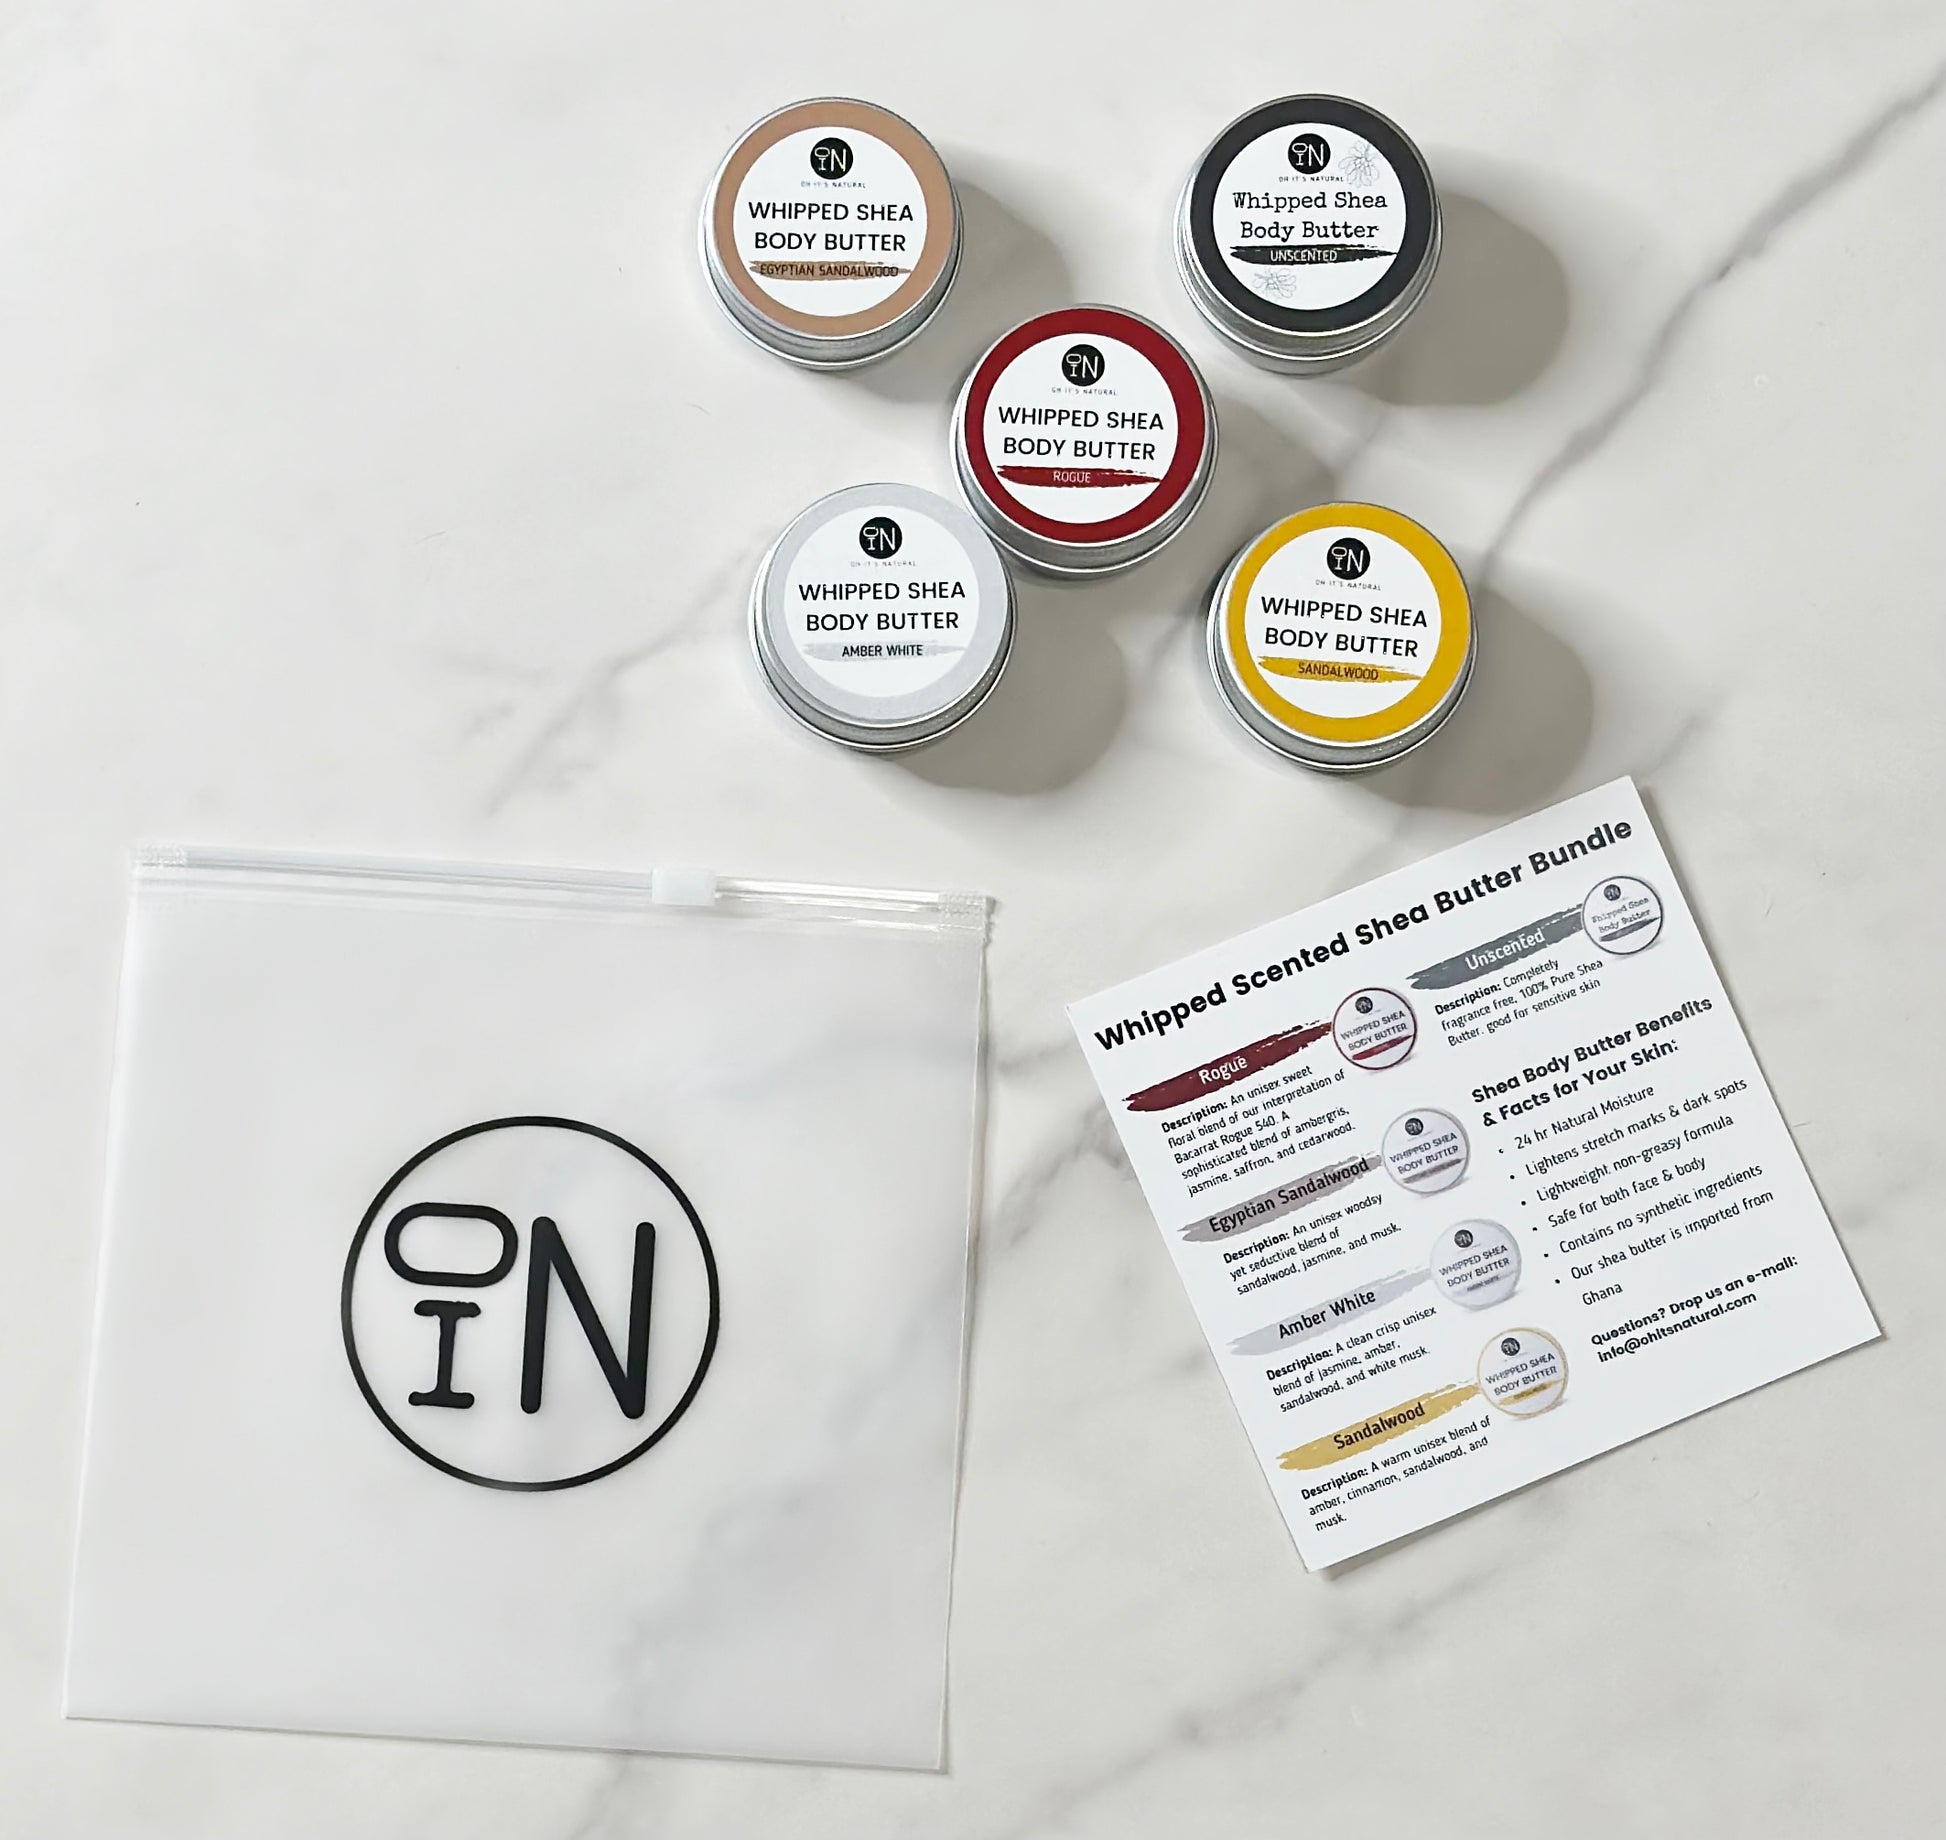  scented shea body butter sample travel pack by oh it's natural